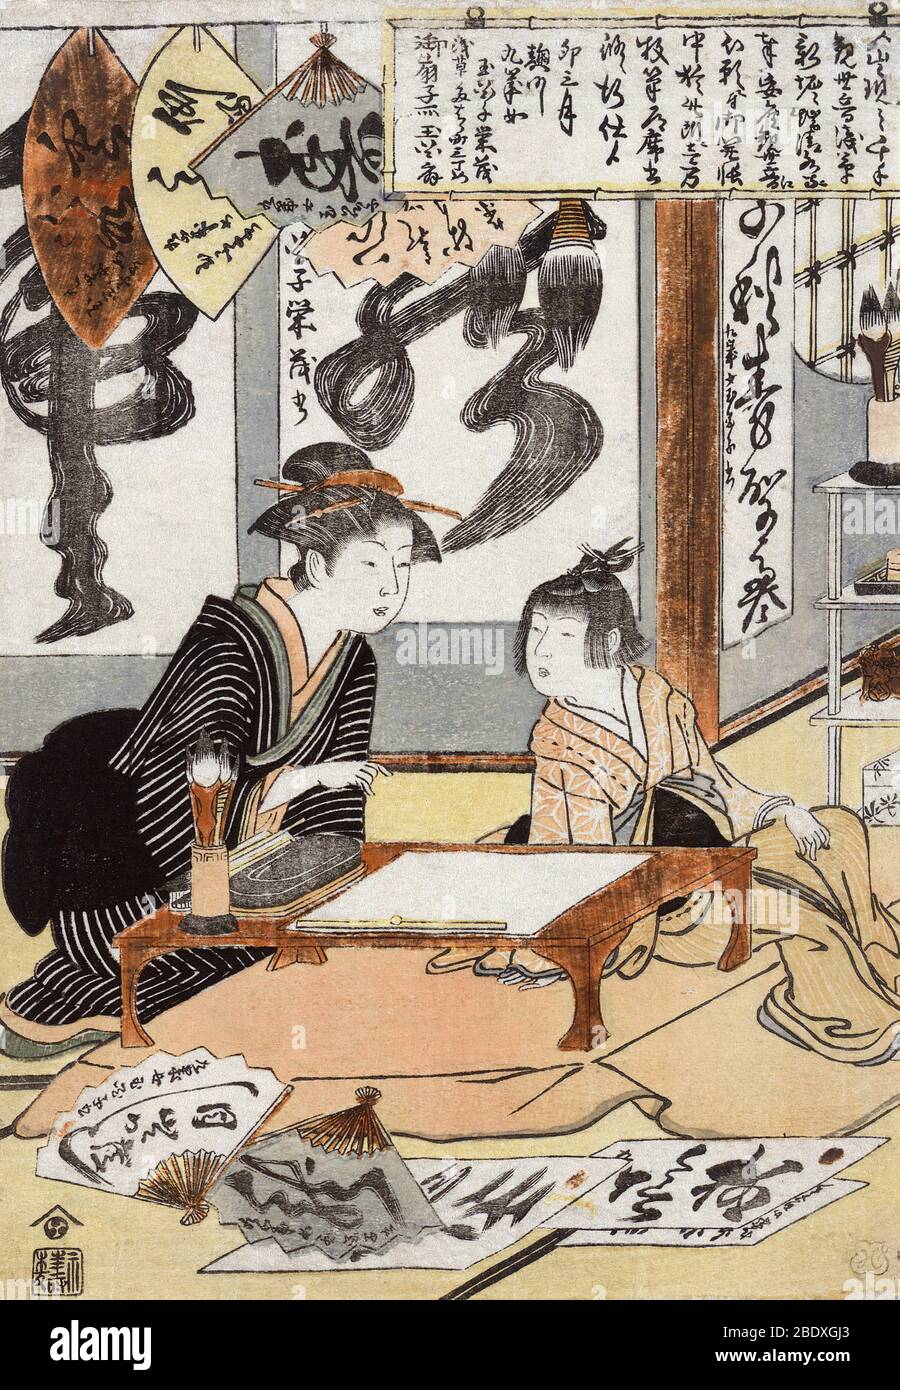 Japanese Calligrapher with Student, 1780s Stock Photo